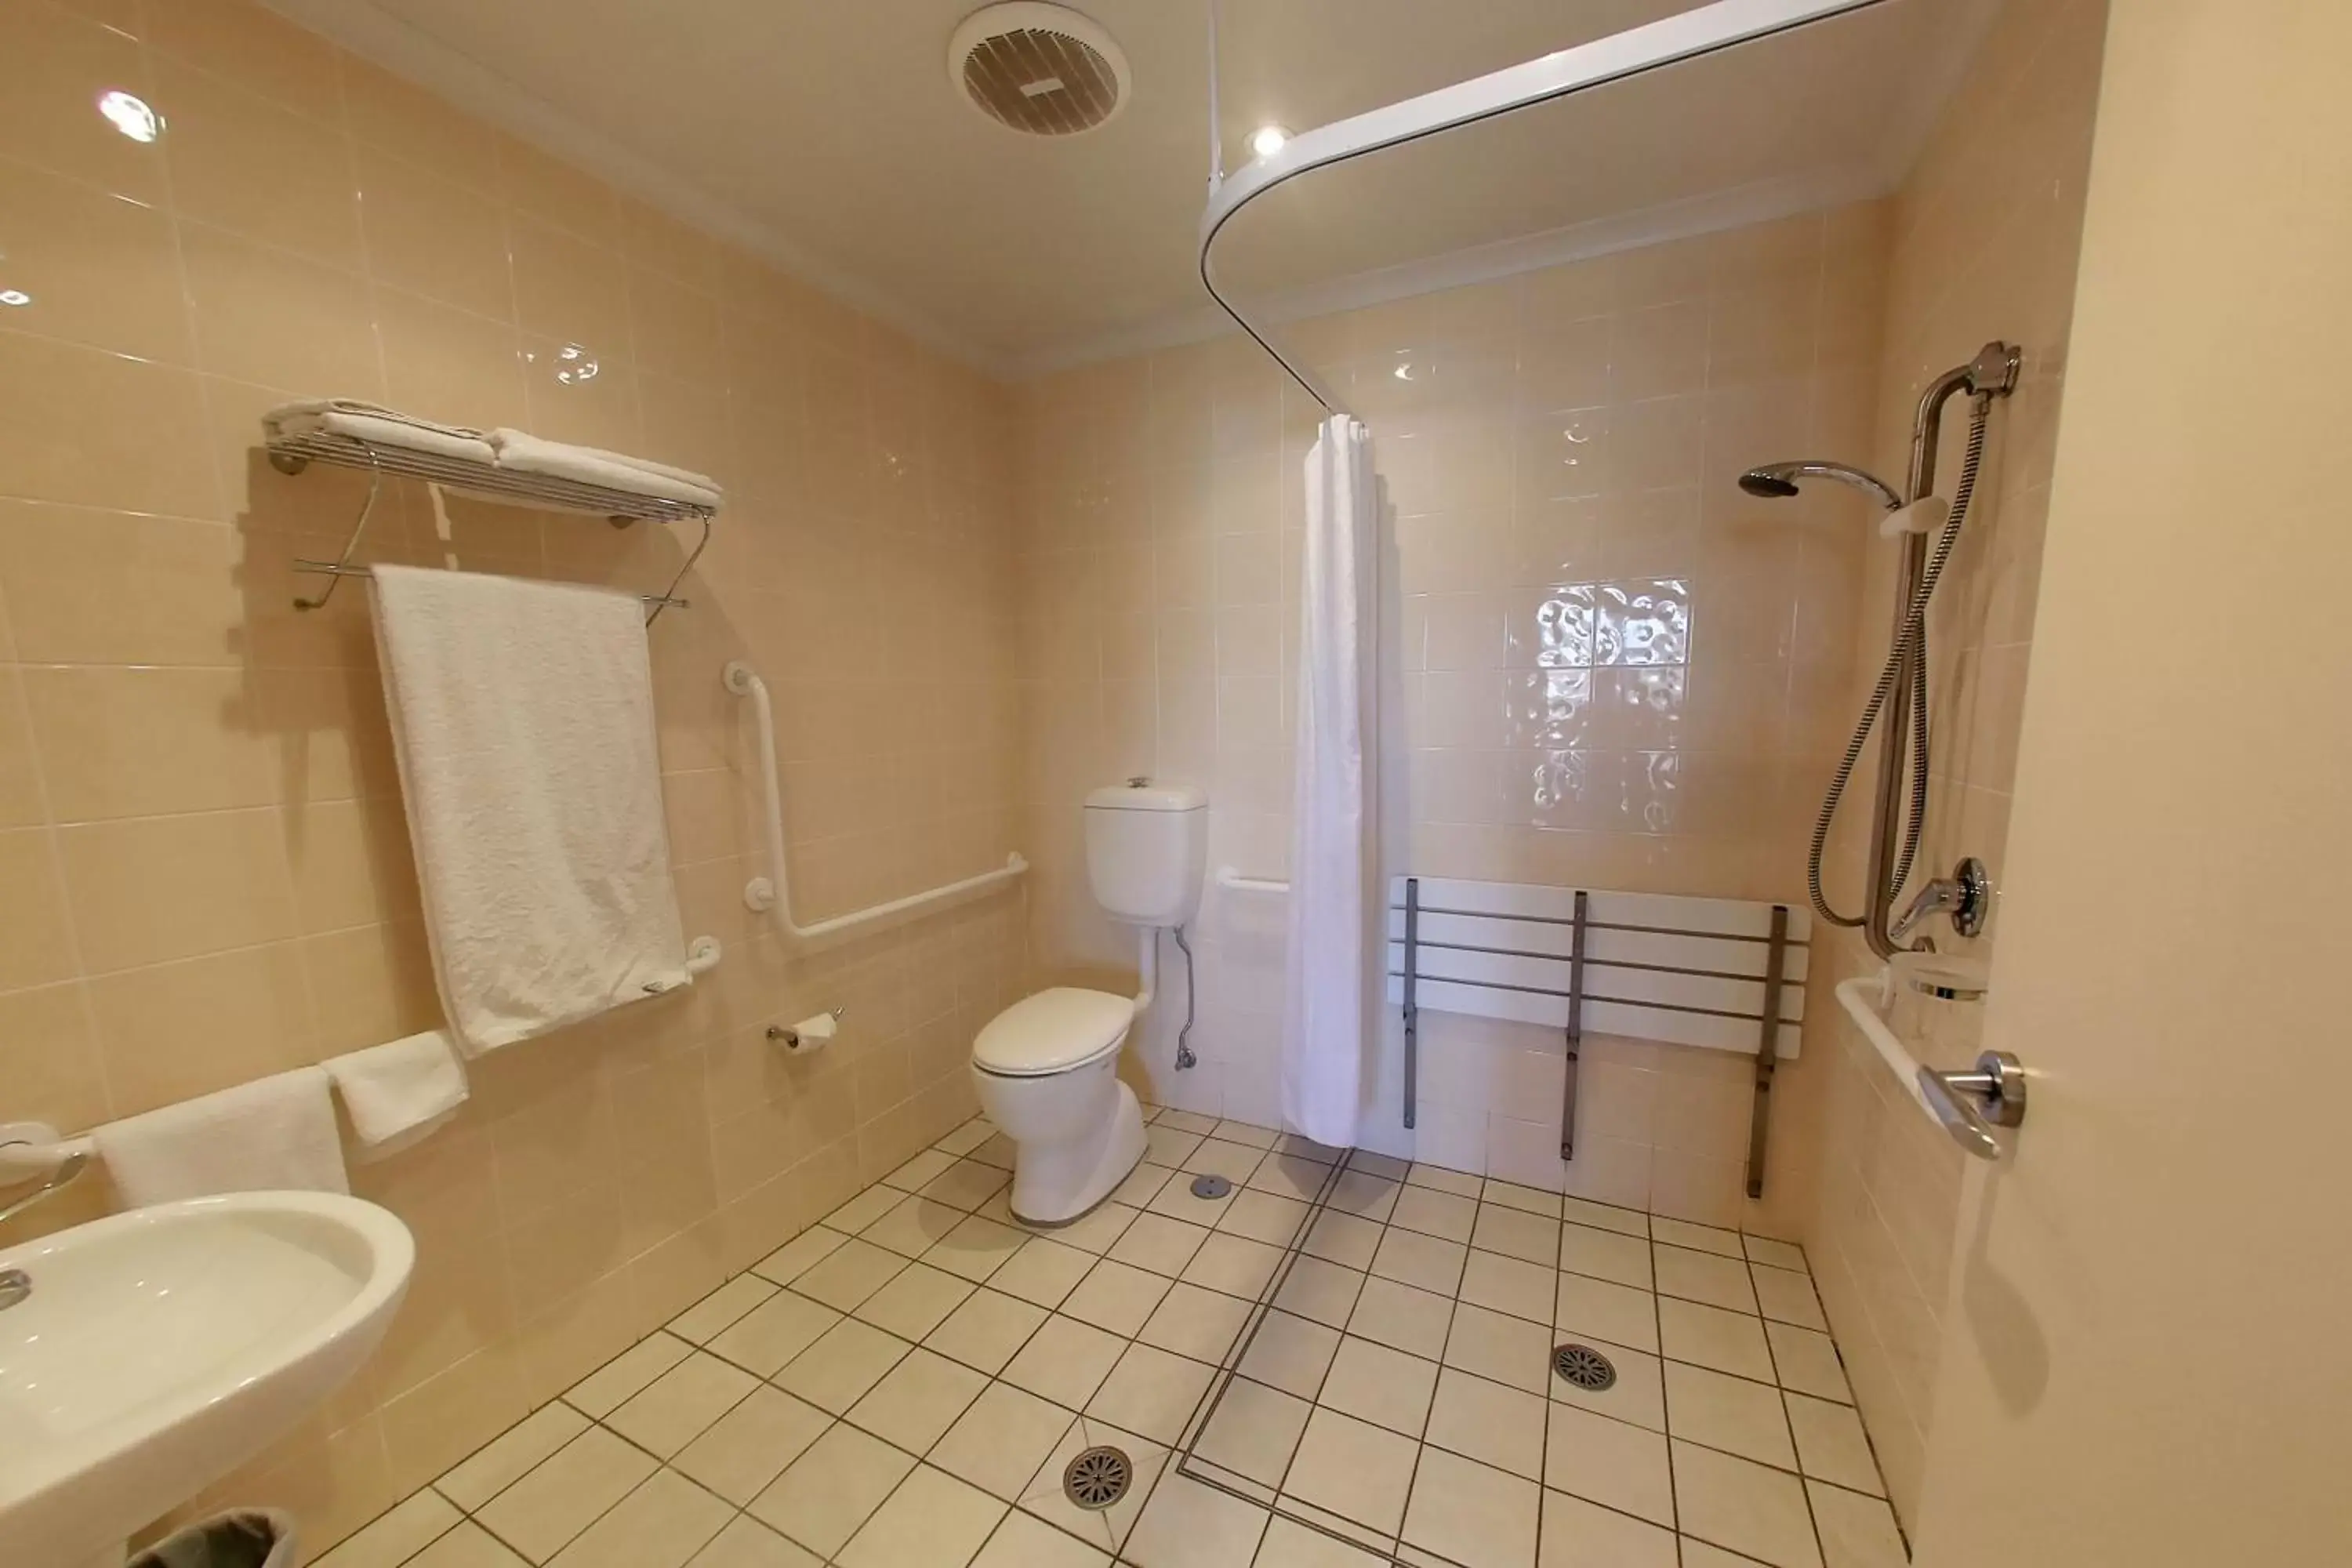 Facility for disabled guests, Bathroom in Forbes Victoria Inn